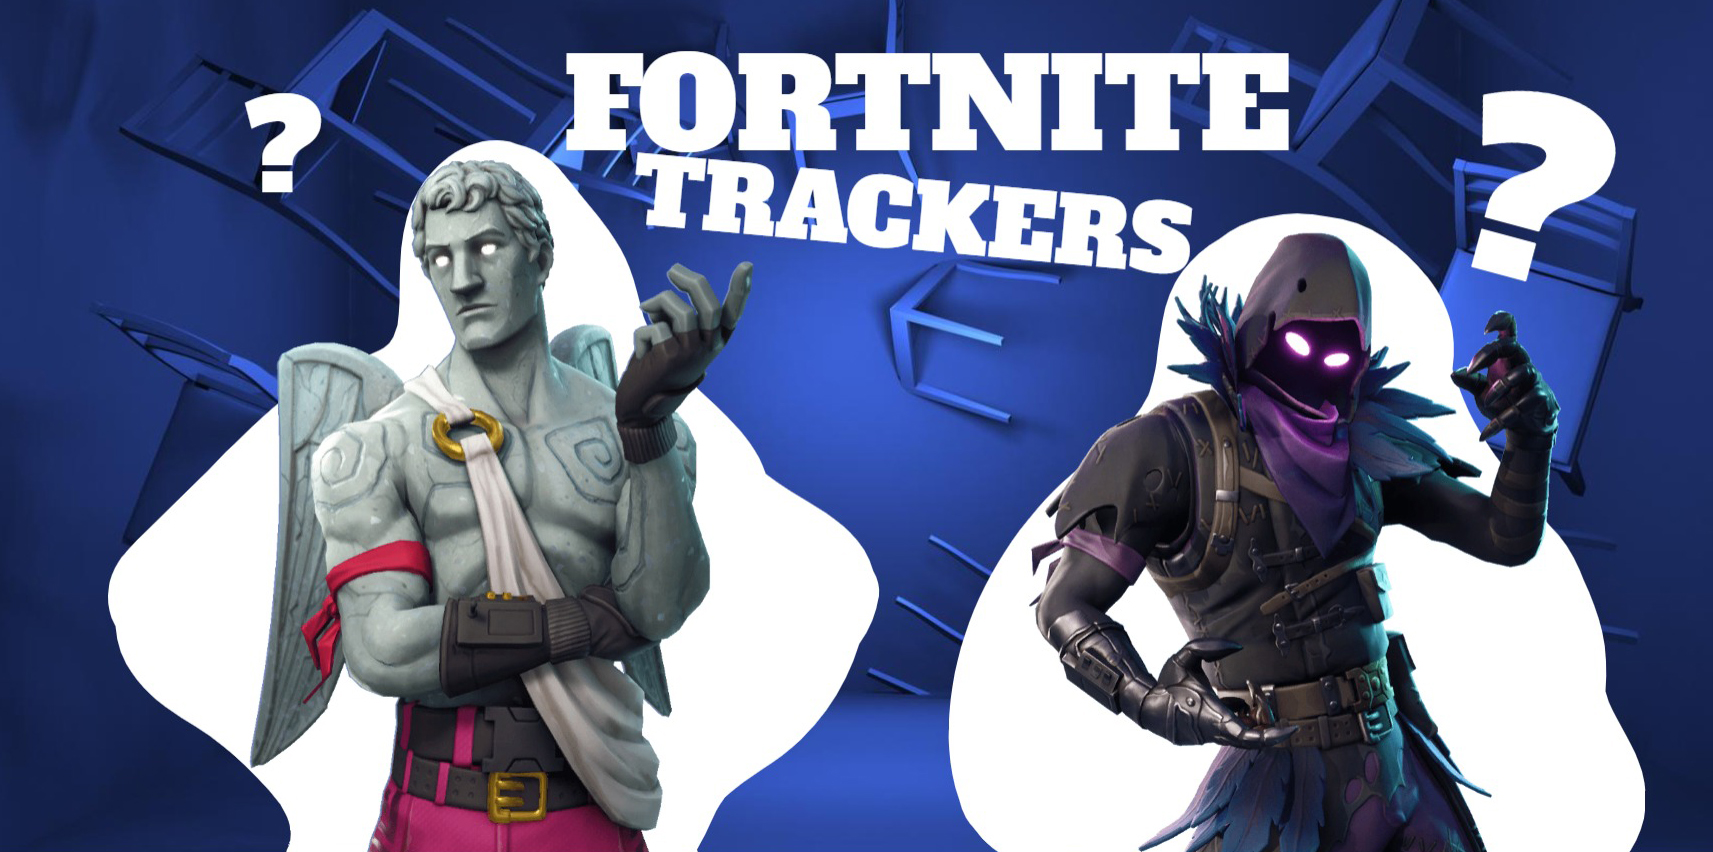 Top: The Best Fortnite Trackers to Track Stats Accurately (Stats Tracker)